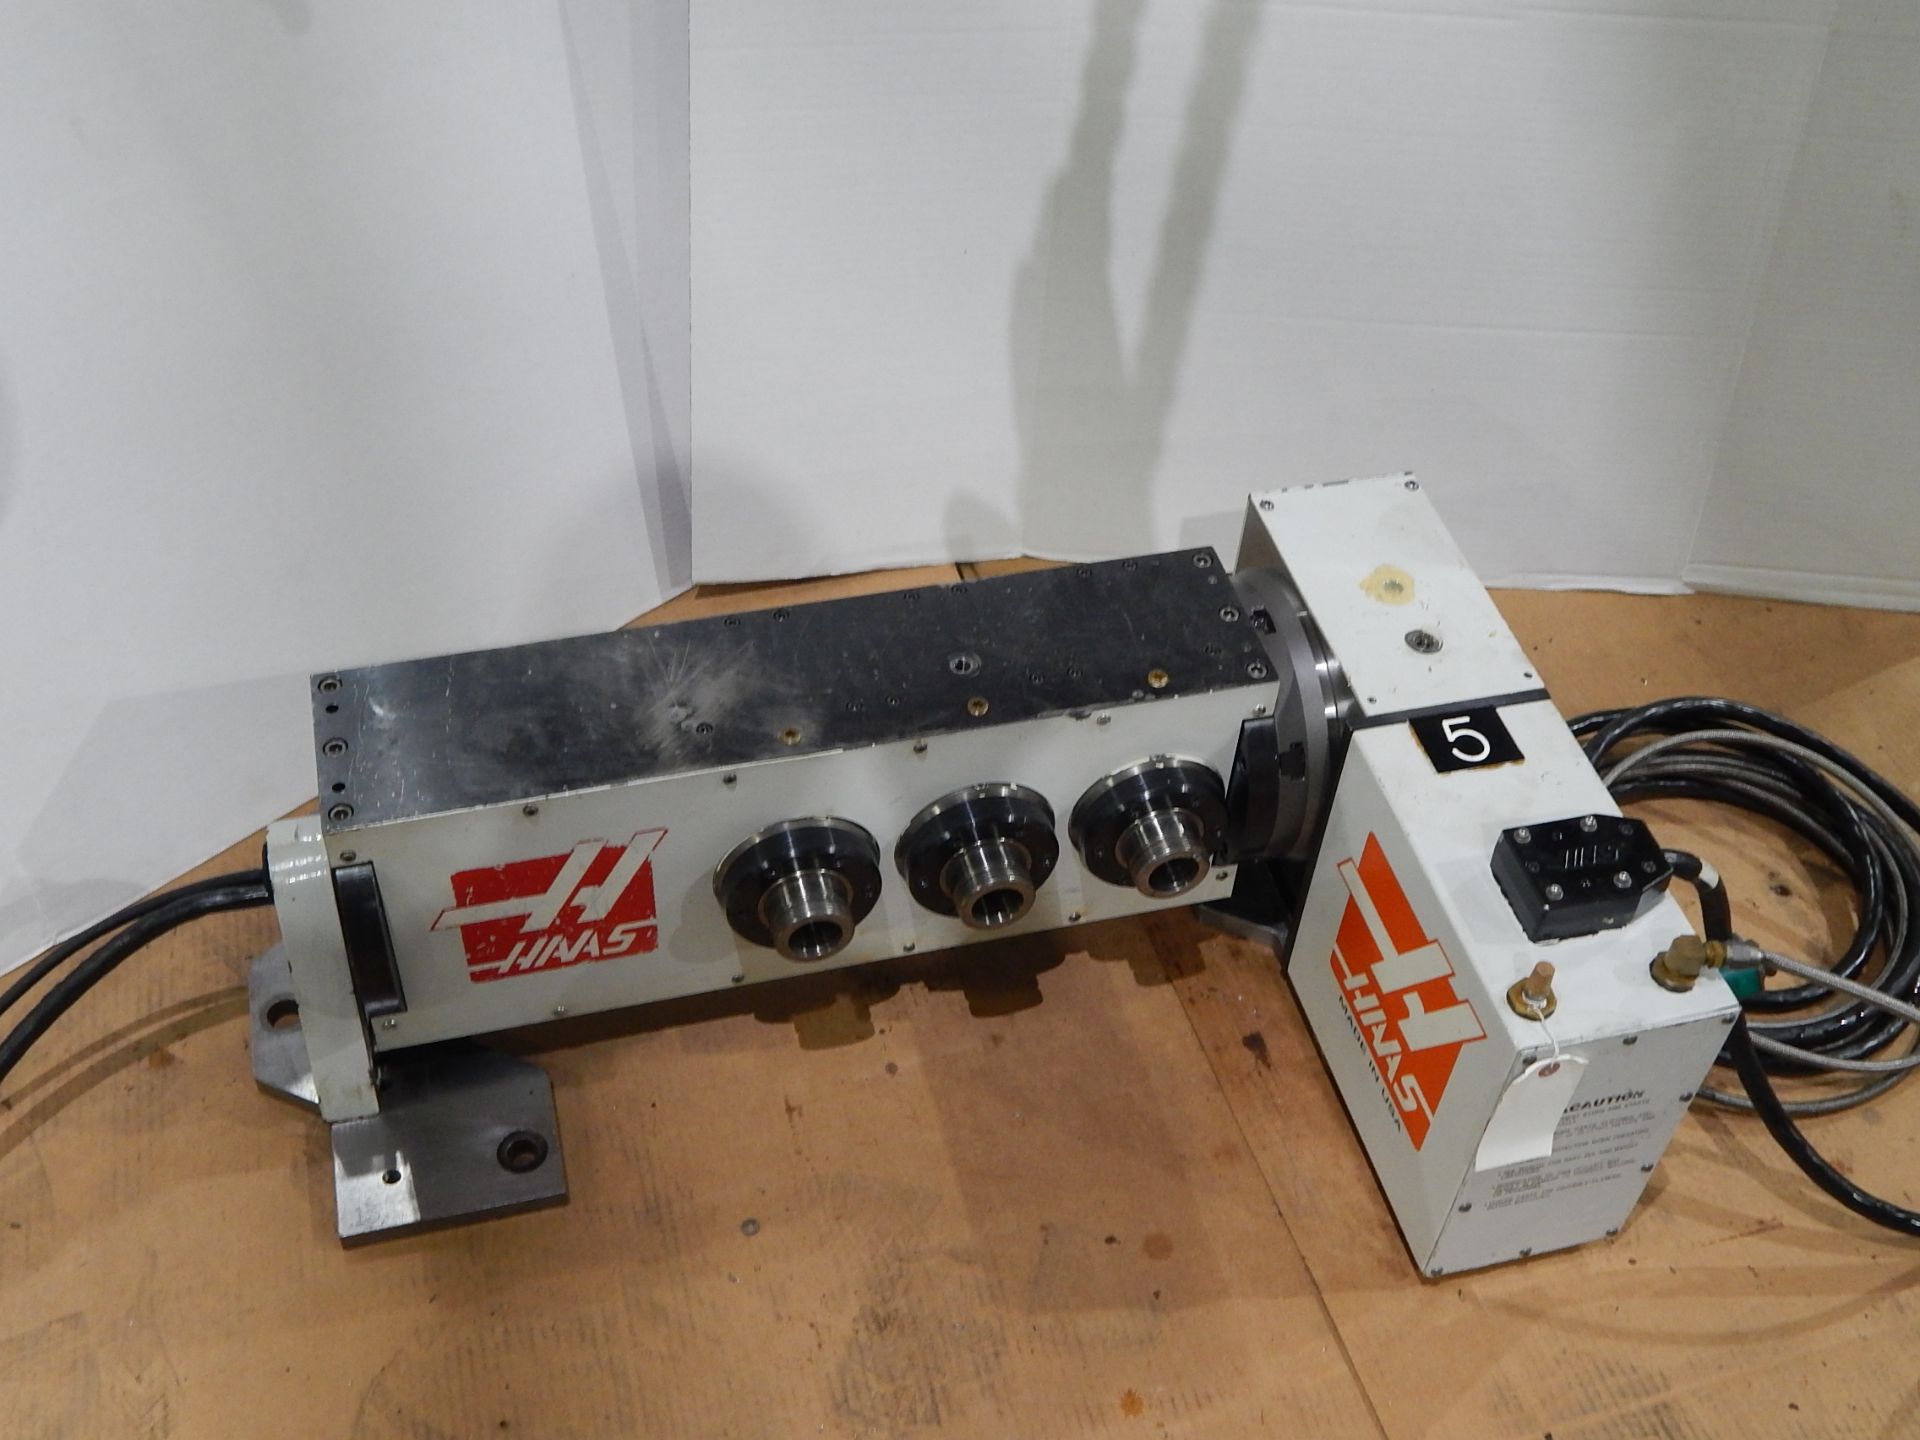 Haas TSC-3 CNC Indexer, s/n 900984A, 4 and 5 Axis, Haas 4th Axis Tilt Rotary Table and (3) Haas 5C